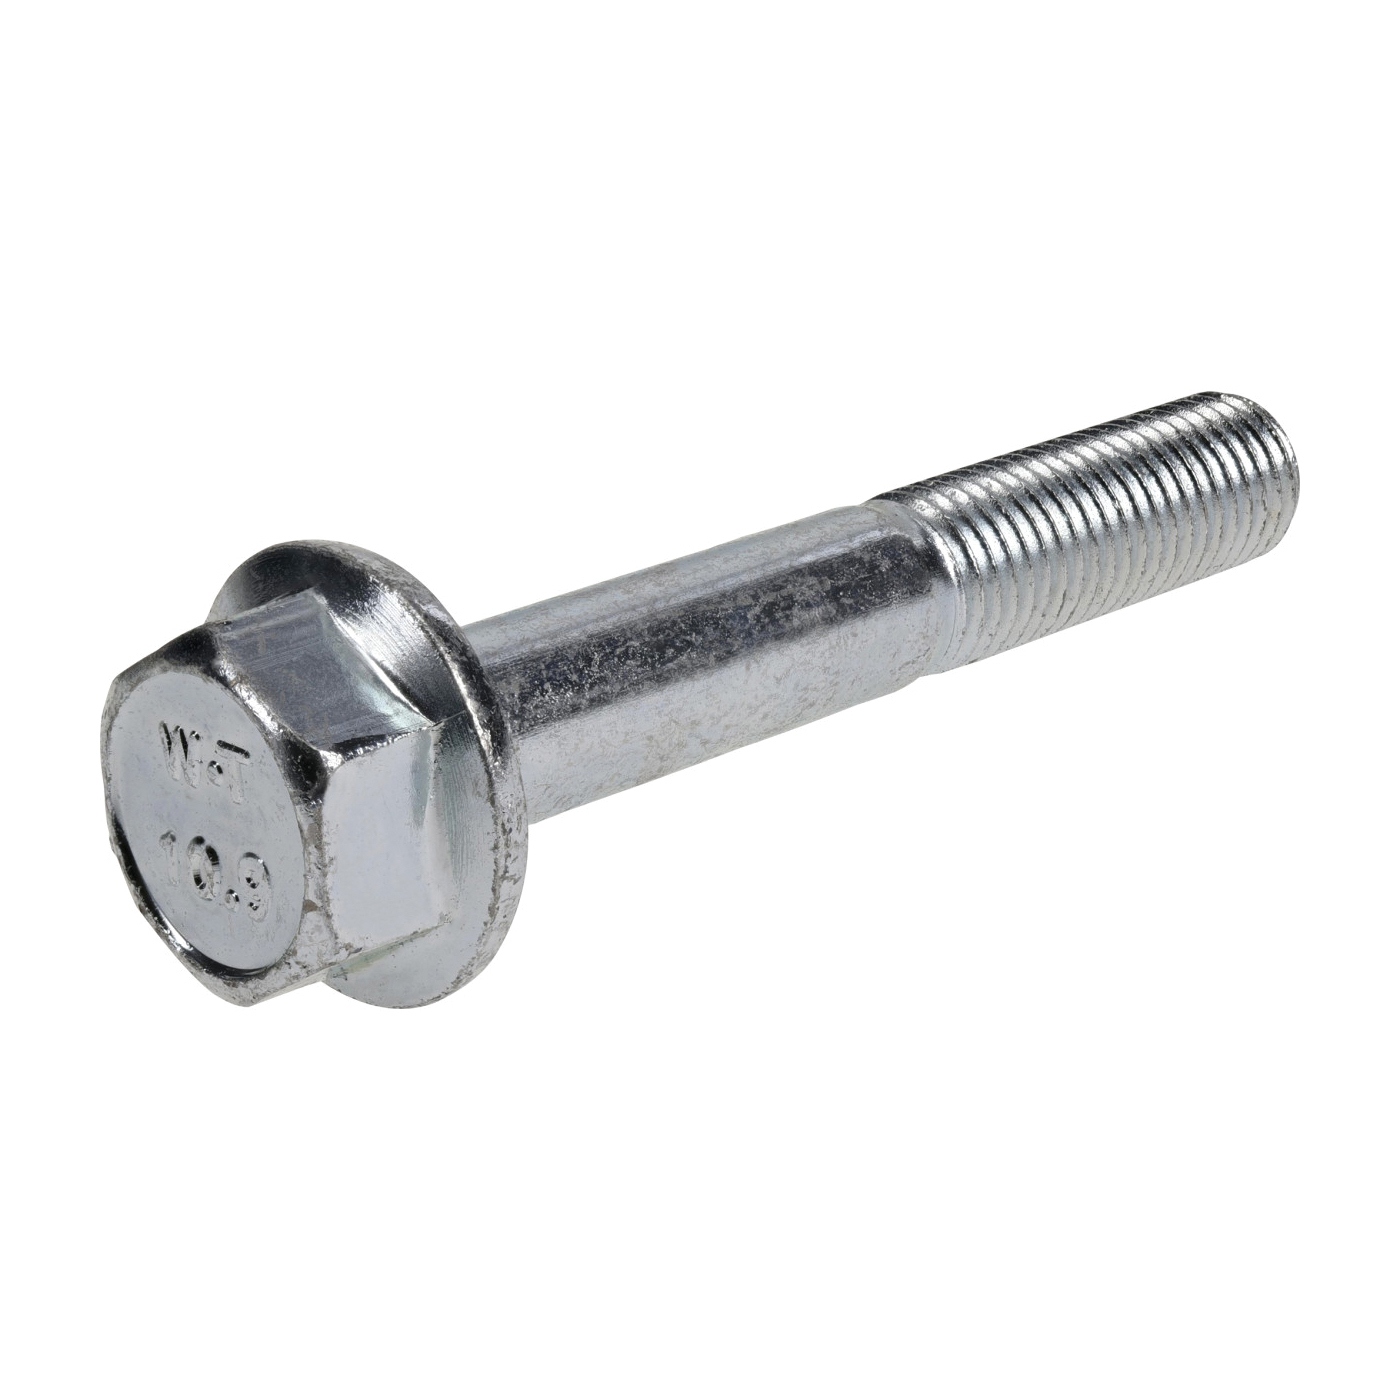 881022 Hex Bolt, 1/2 in Thread, 2 in OAL, 5 Grade, Steel, Zinc-Plated, SAE Measuring, Coarse Thread